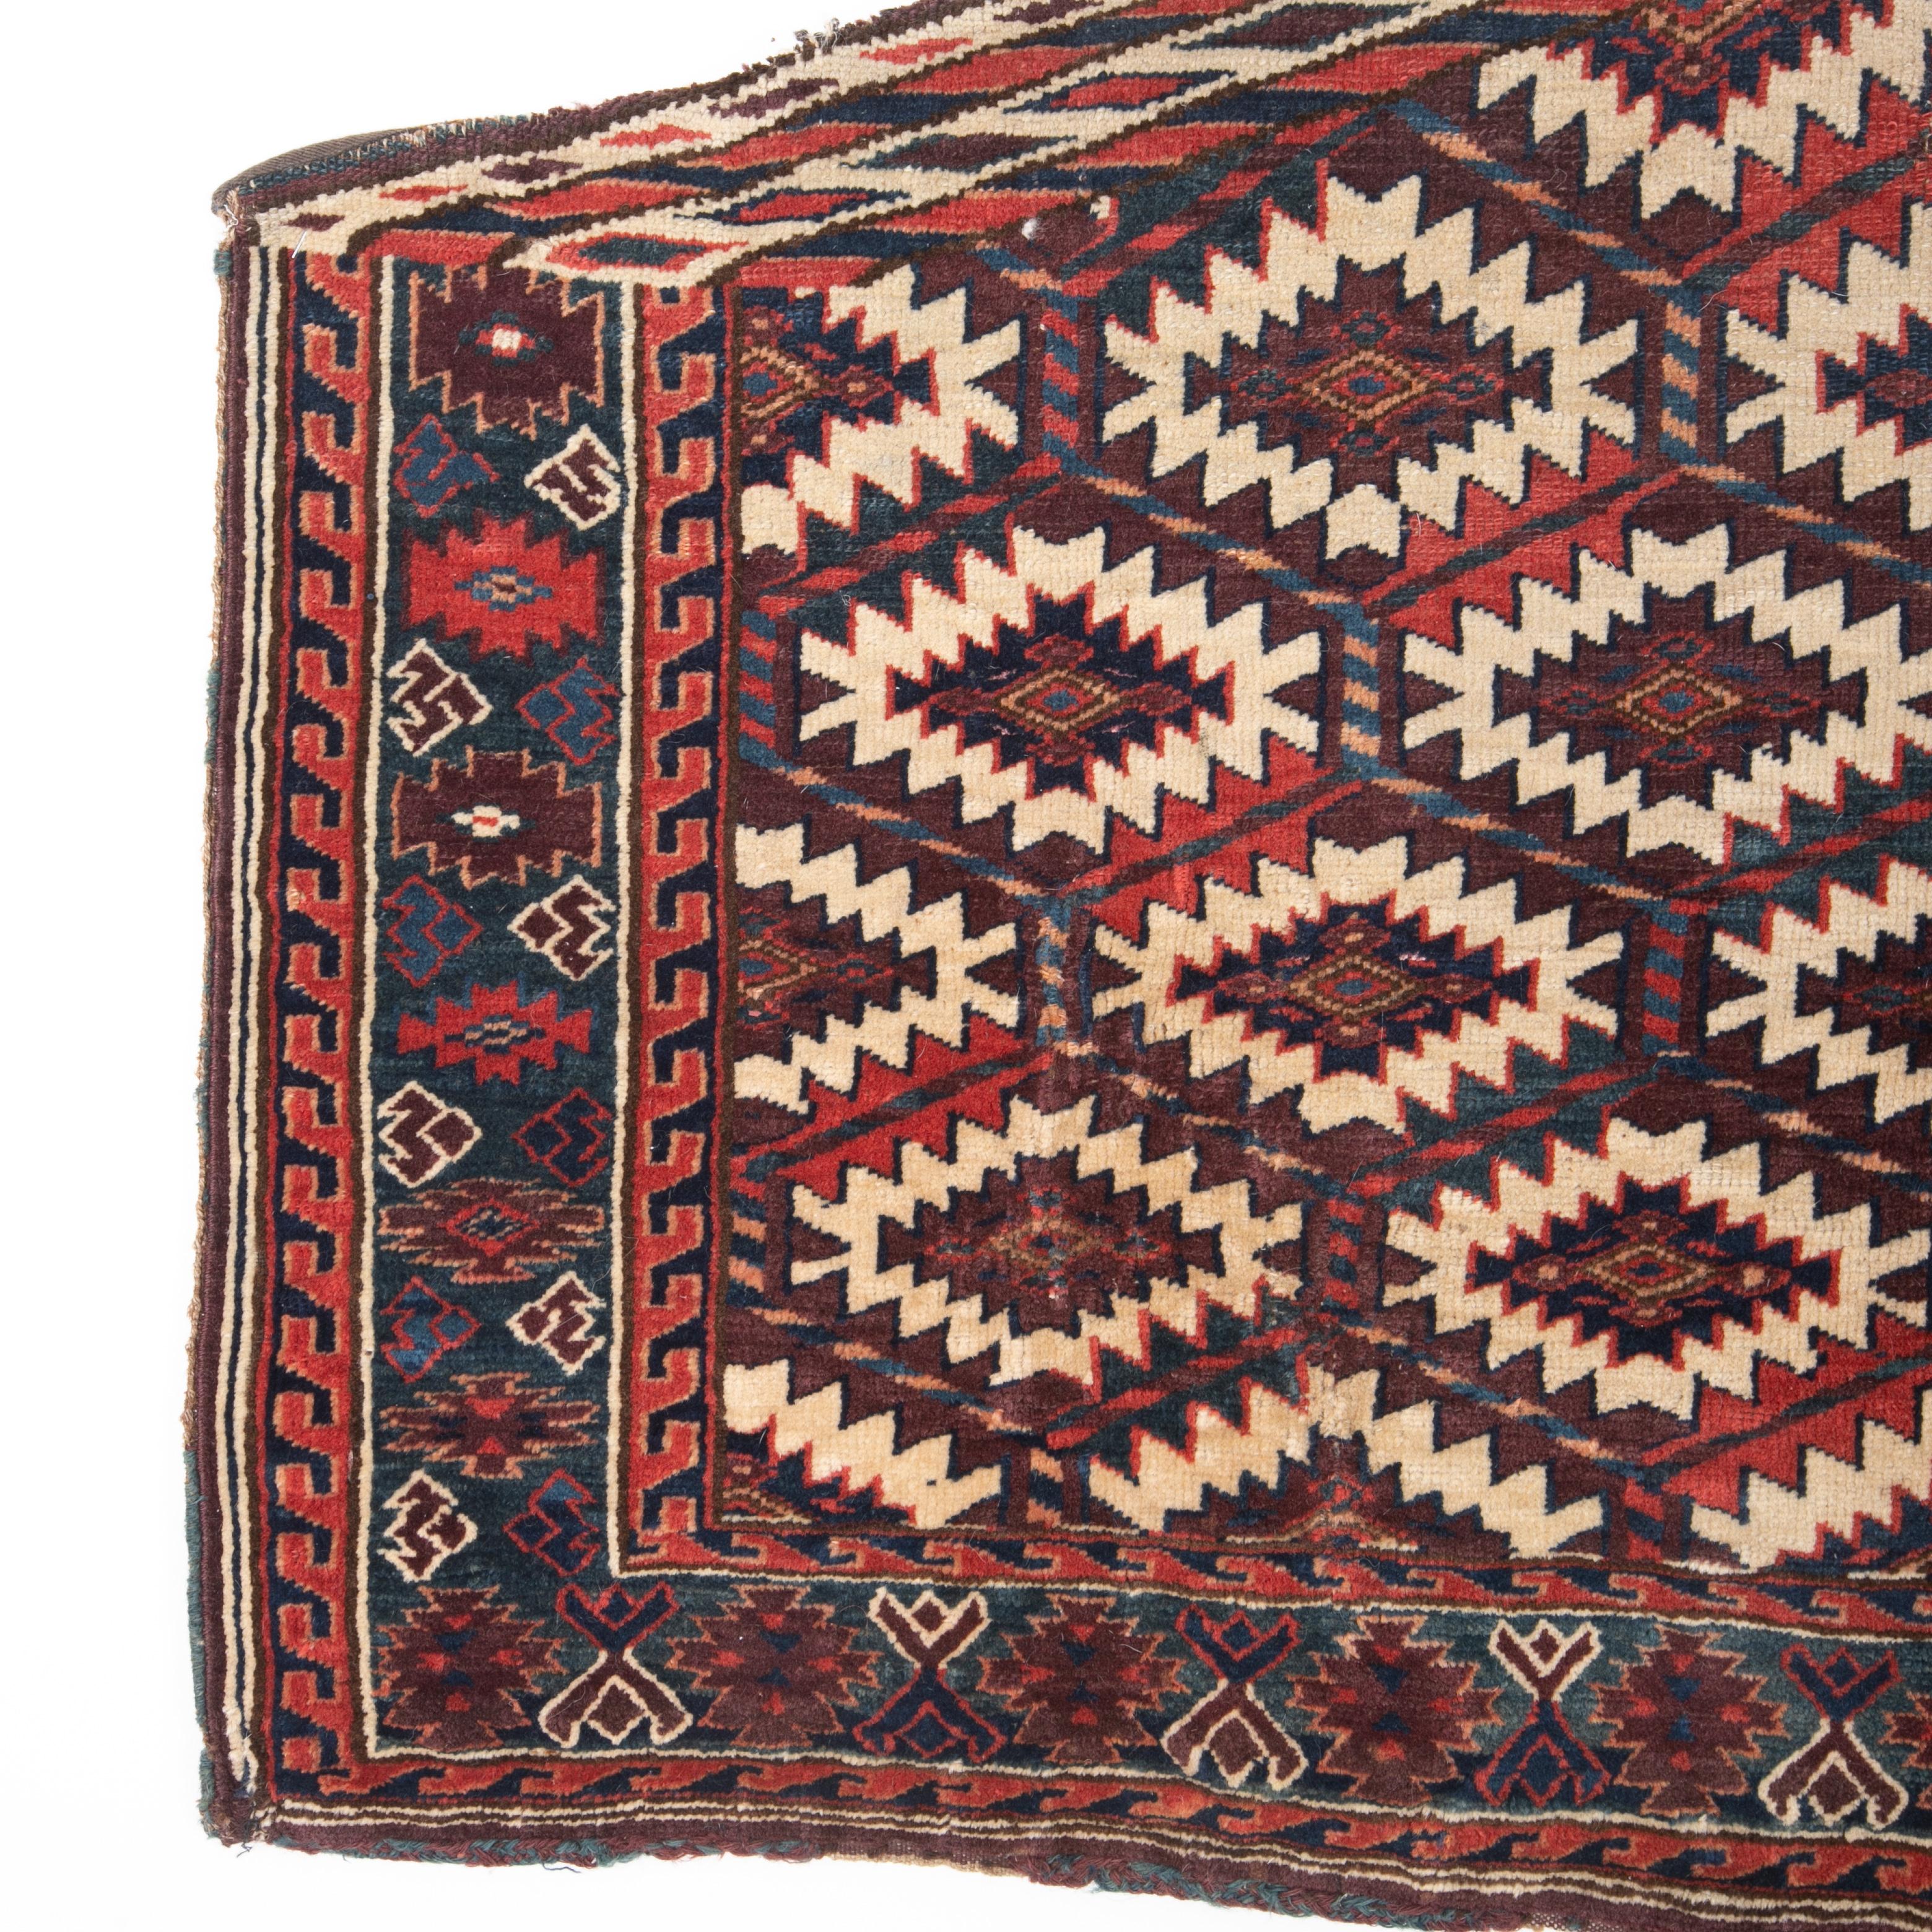 Asmalys (Camel trappings) are an essential part of a camel decoration for people of Turkmen tribes in Central Asia. This is a late 19th c example of Yomud tribe.
 